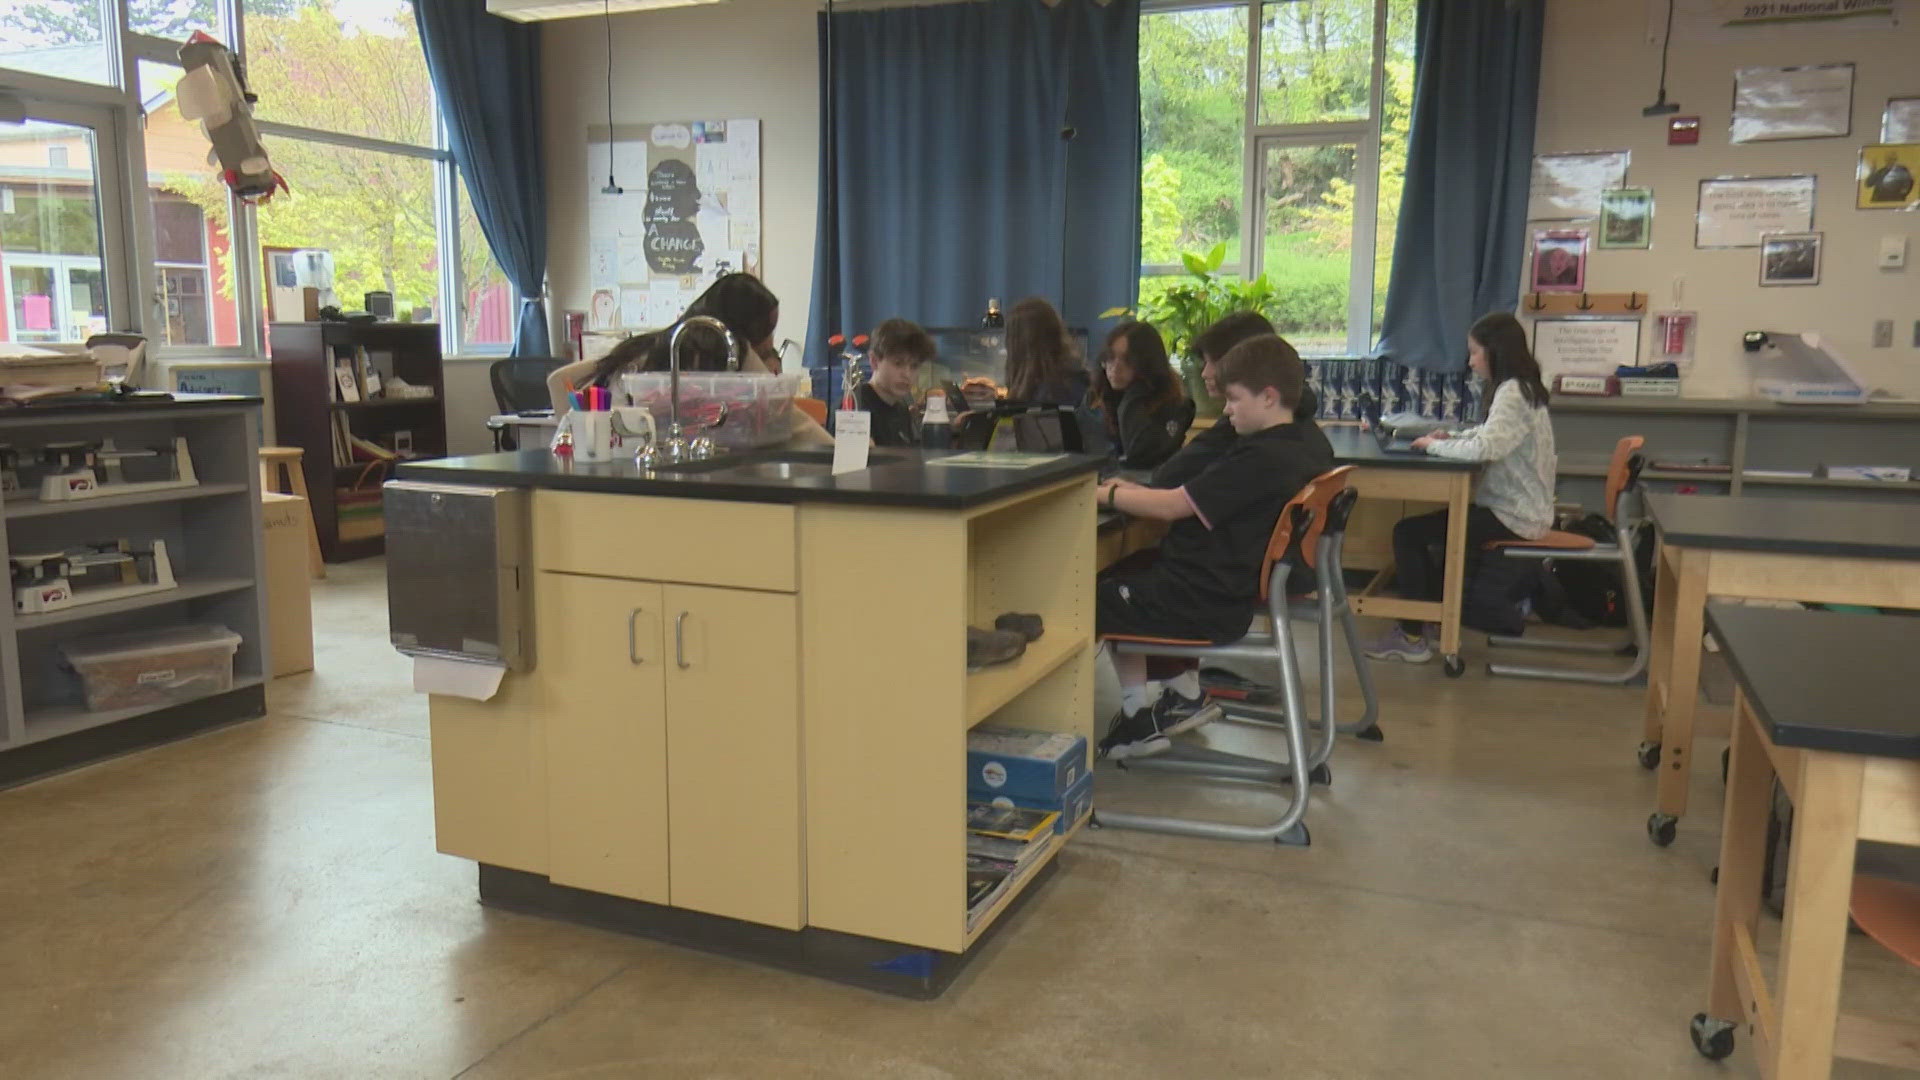 Eleven students from Open Window School in Bellevue will conduct a science experiment in space as part of a NASA program.